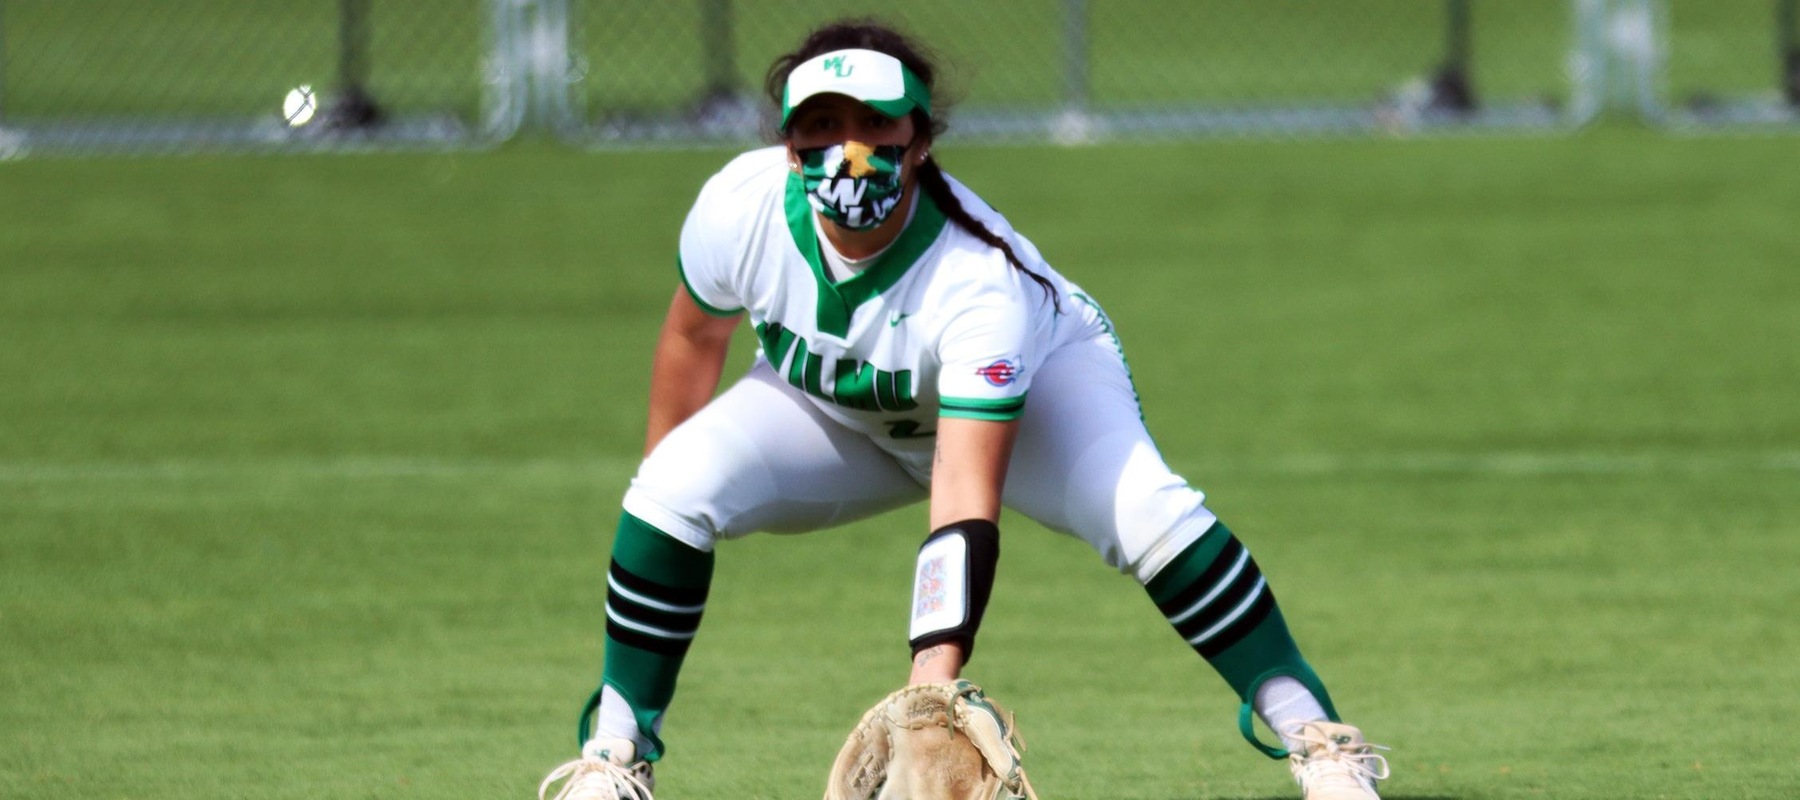 File photo of Alyssa Velasquez who had two hits in each game against Caldwell. Copyright 2021; Wilmington University. All rights reserved. Photo by Dan Lauletta. March 27, 2021 at Felician.